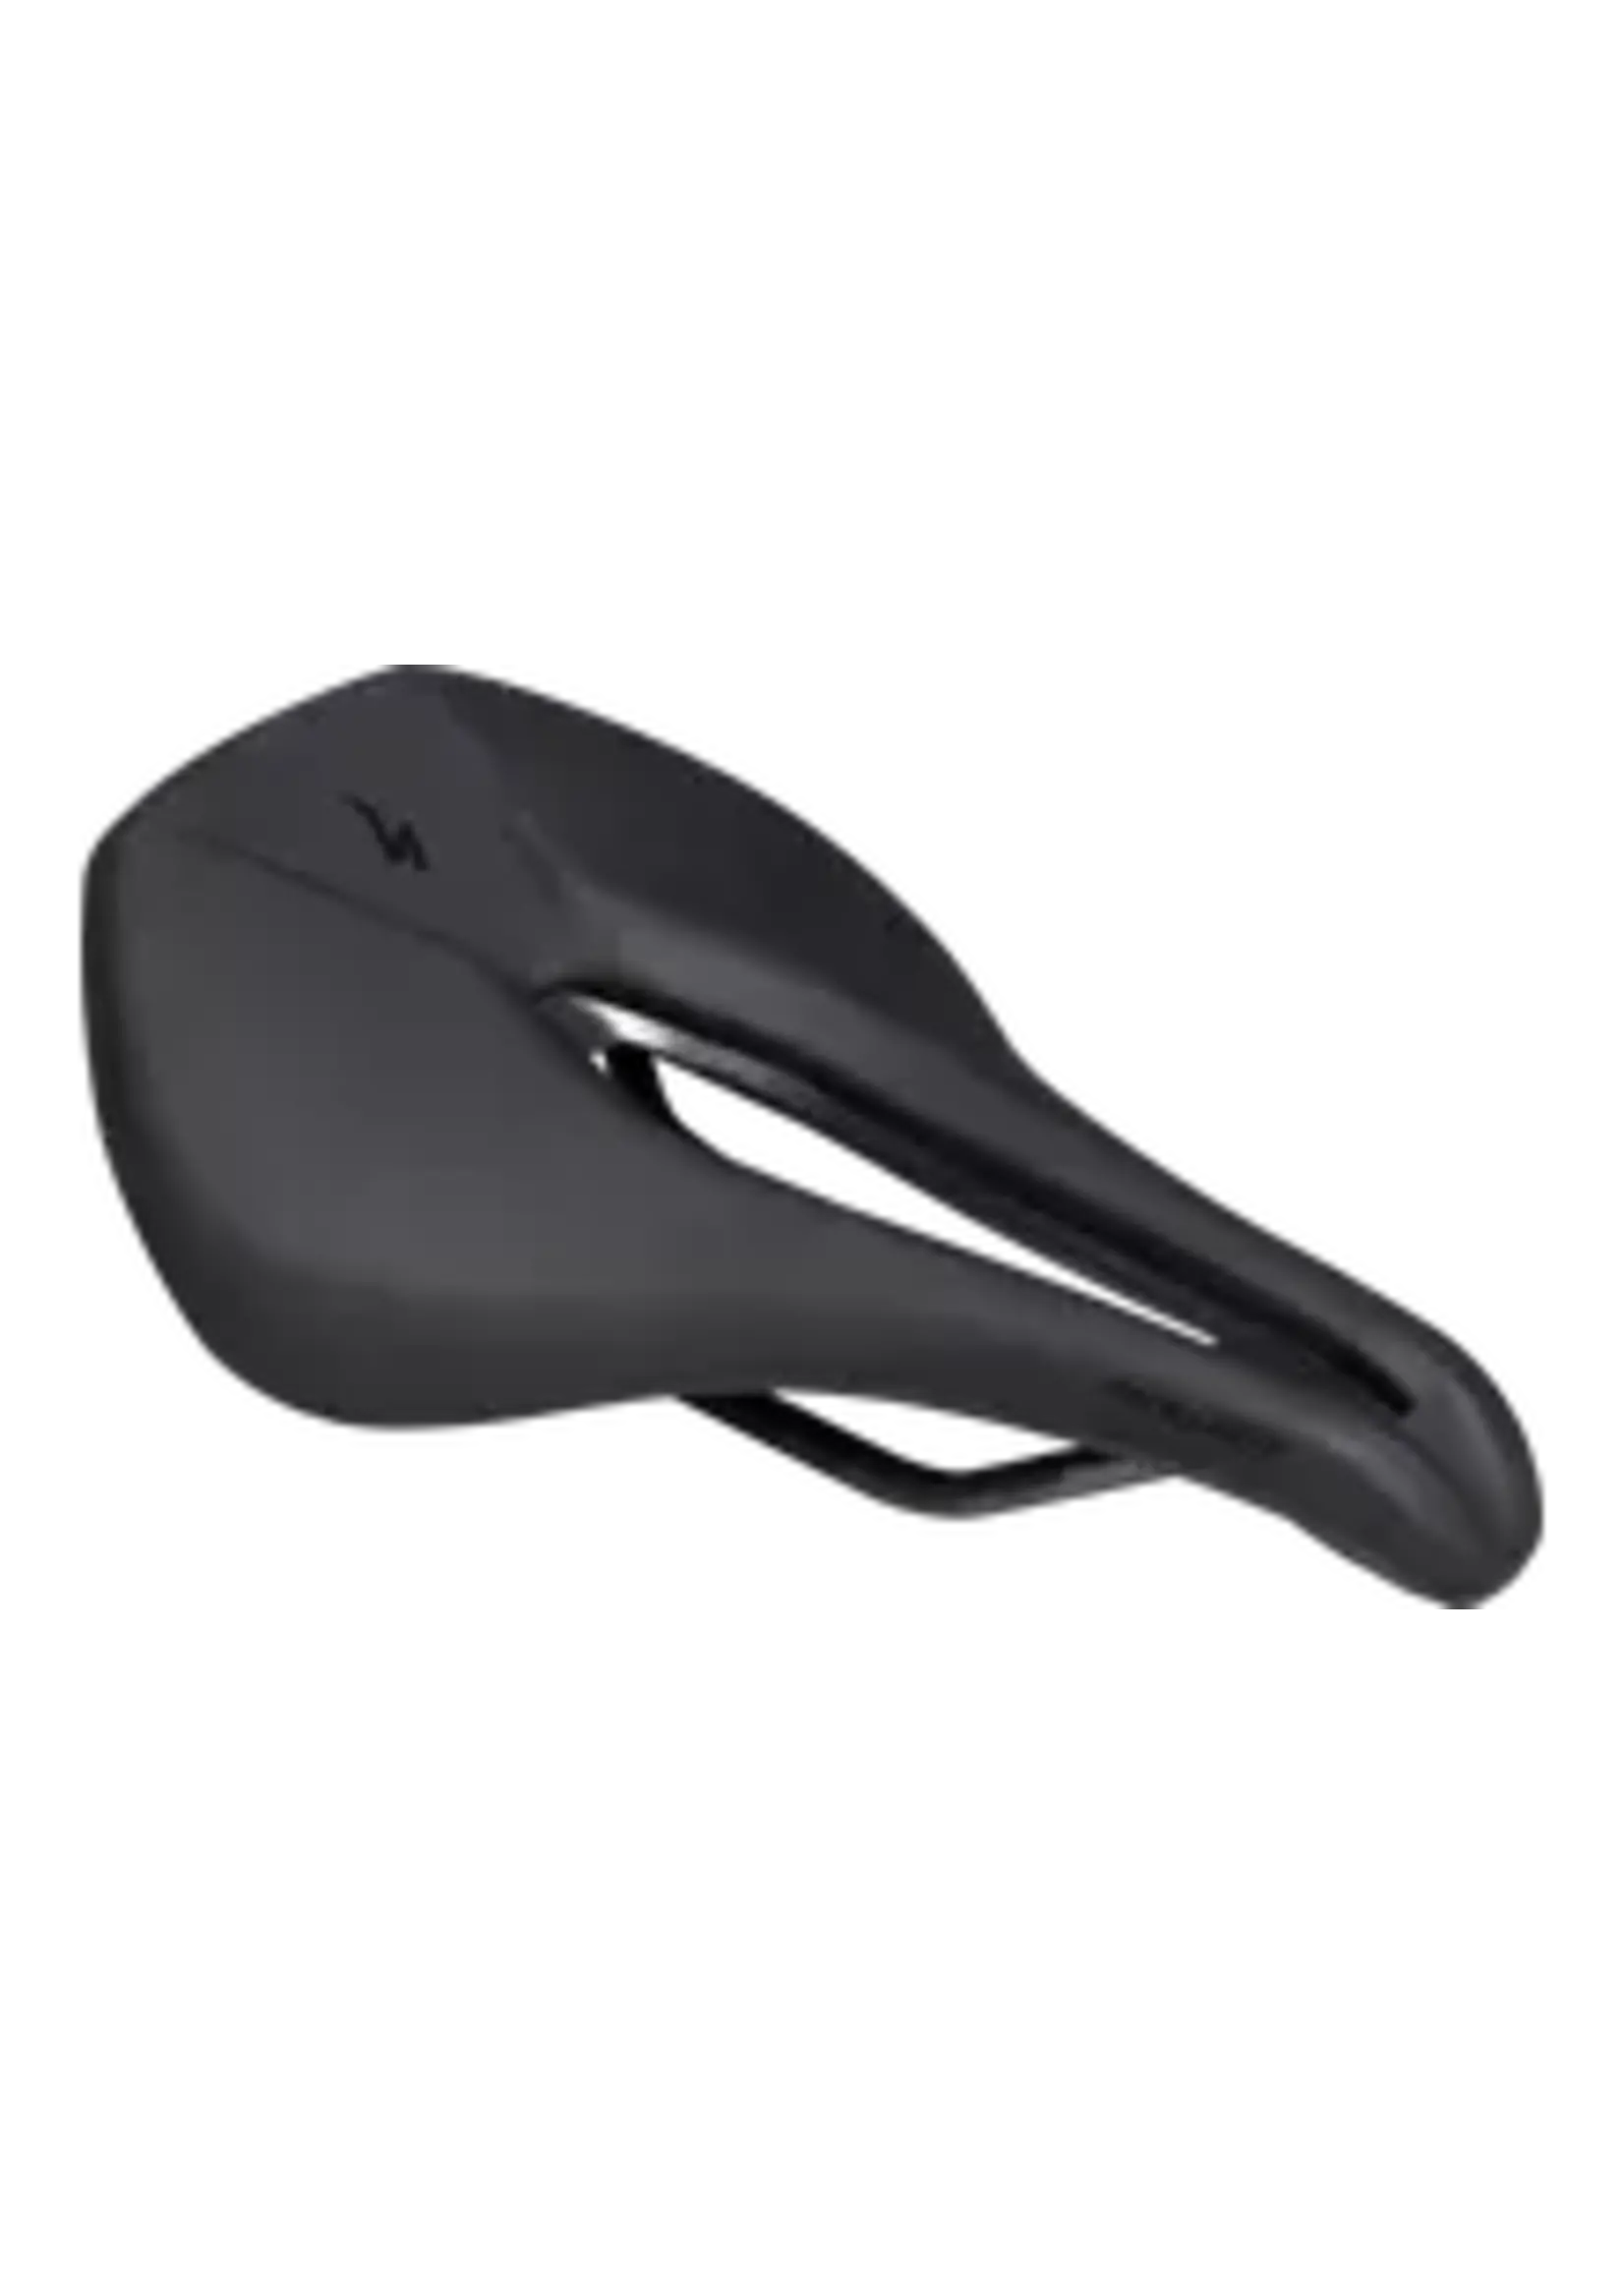 Specialized POWER COMP SADDLE BLK 143